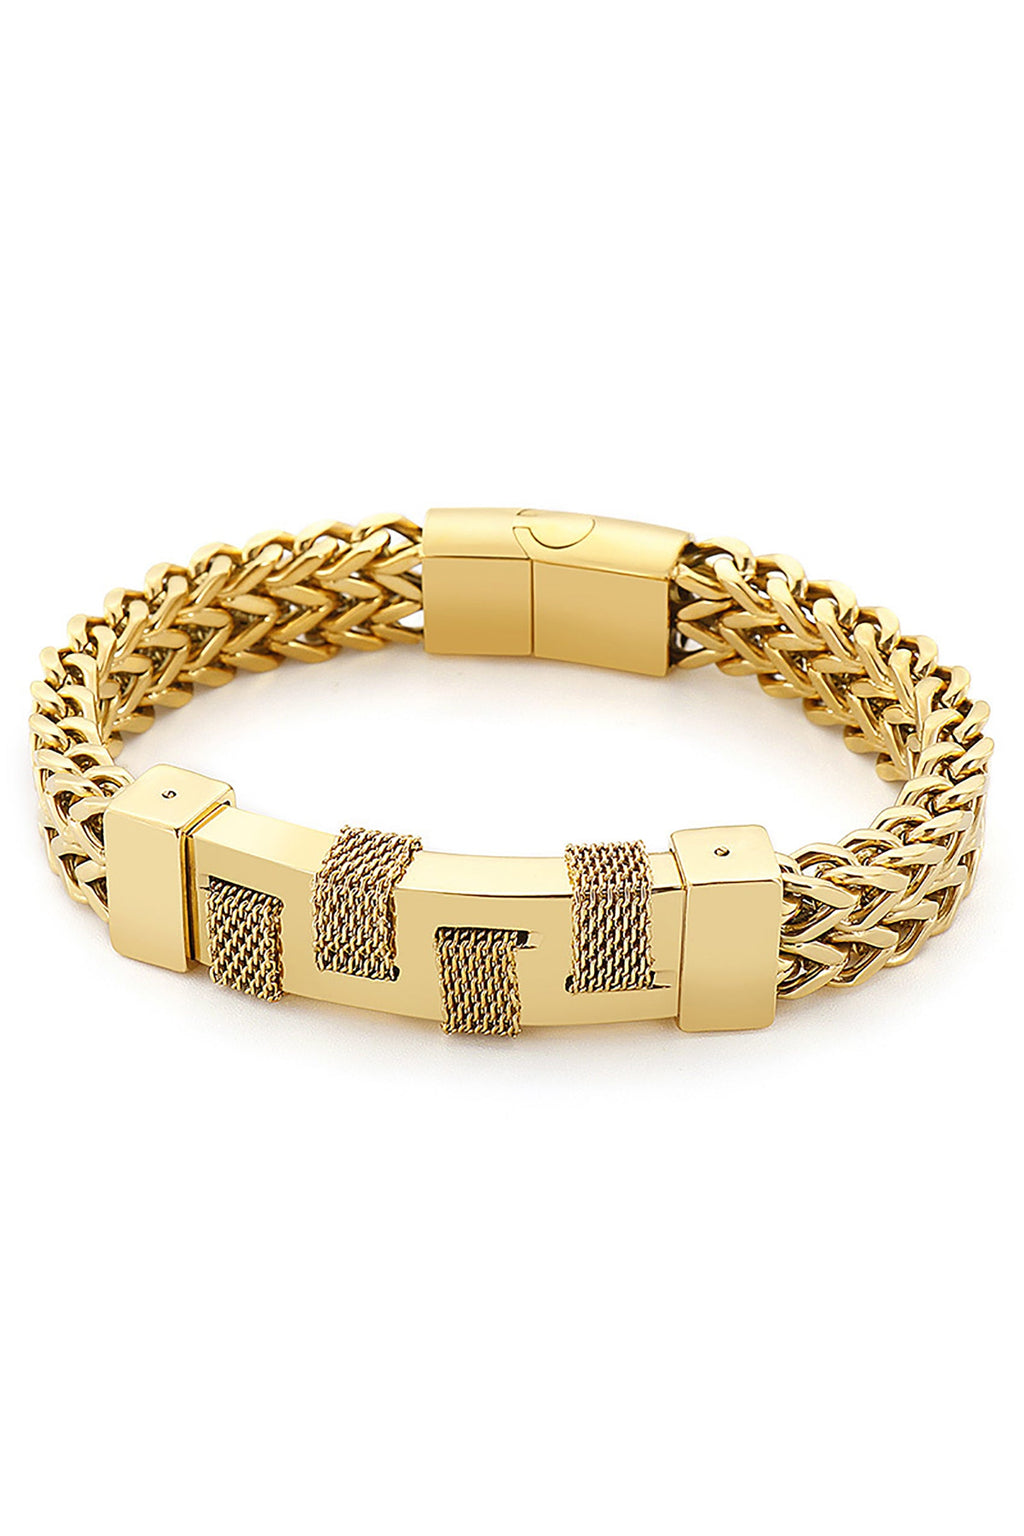 Theo Titanium Bracelet: A Touch of Rugged Sophistication